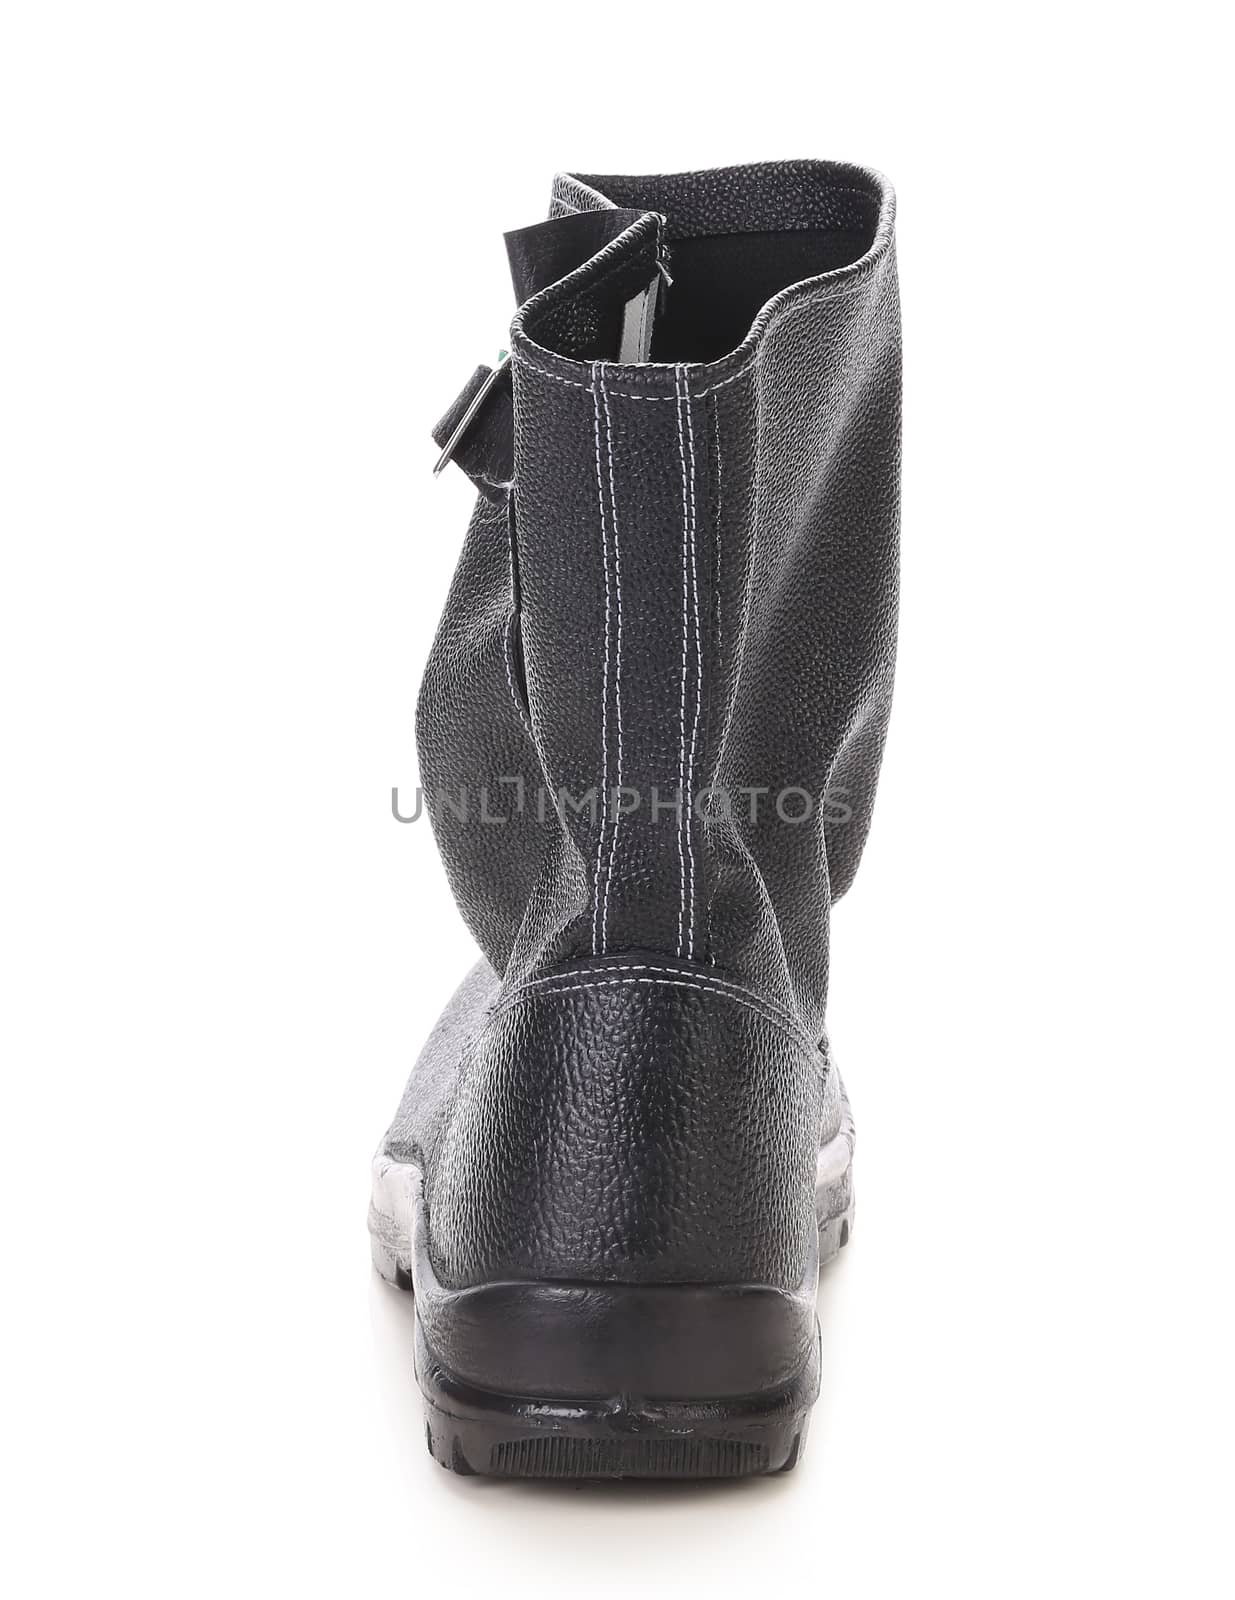 Kersey boot. Isolated on a white background.